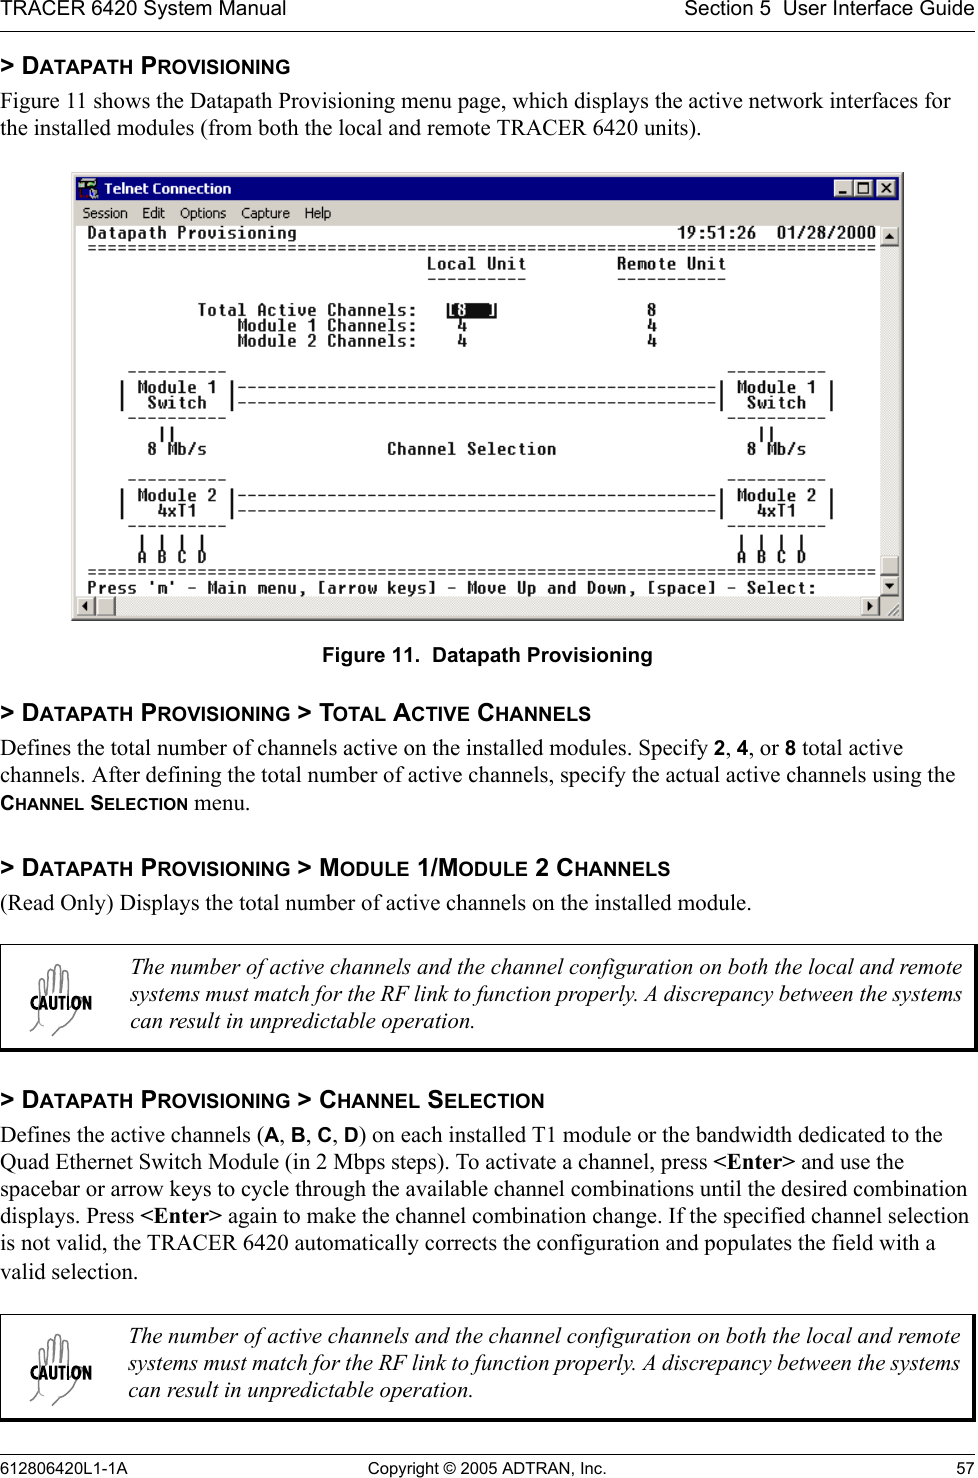 TRACER 6420 System Manual Section 5  User Interface Guide612806420L1-1A Copyright © 2005 ADTRAN, Inc. 57&gt; DATAPATH PROVISIONINGFigure 11 shows the Datapath Provisioning menu page, which displays the active network interfaces for the installed modules (from both the local and remote TRACER 6420 units). Figure 11.  Datapath Provisioning&gt; DATAPATH PROVISIONING &gt; TOTAL ACTIVE CHANNELSDefines the total number of channels active on the installed modules. Specify 2, 4, or 8 total active channels. After defining the total number of active channels, specify the actual active channels using the CHANNEL SELECTION menu.&gt; DATAPATH PROVISIONING &gt; MODULE 1/MODULE 2 CHANNELS(Read Only) Displays the total number of active channels on the installed module.&gt; DATAPATH PROVISIONING &gt; CHANNEL SELECTIONDefines the active channels (A, B, C, D) on each installed T1 module or the bandwidth dedicated to the Quad Ethernet Switch Module (in 2 Mbps steps). To activate a channel, press &lt;Enter&gt; and use the spacebar or arrow keys to cycle through the available channel combinations until the desired combination displays. Press &lt;Enter&gt; again to make the channel combination change. If the specified channel selection is not valid, the TRACER 6420 automatically corrects the configuration and populates the field with a valid selection.The number of active channels and the channel configuration on both the local and remote systems must match for the RF link to function properly. A discrepancy between the systems can result in unpredictable operation.The number of active channels and the channel configuration on both the local and remote systems must match for the RF link to function properly. A discrepancy between the systems can result in unpredictable operation.